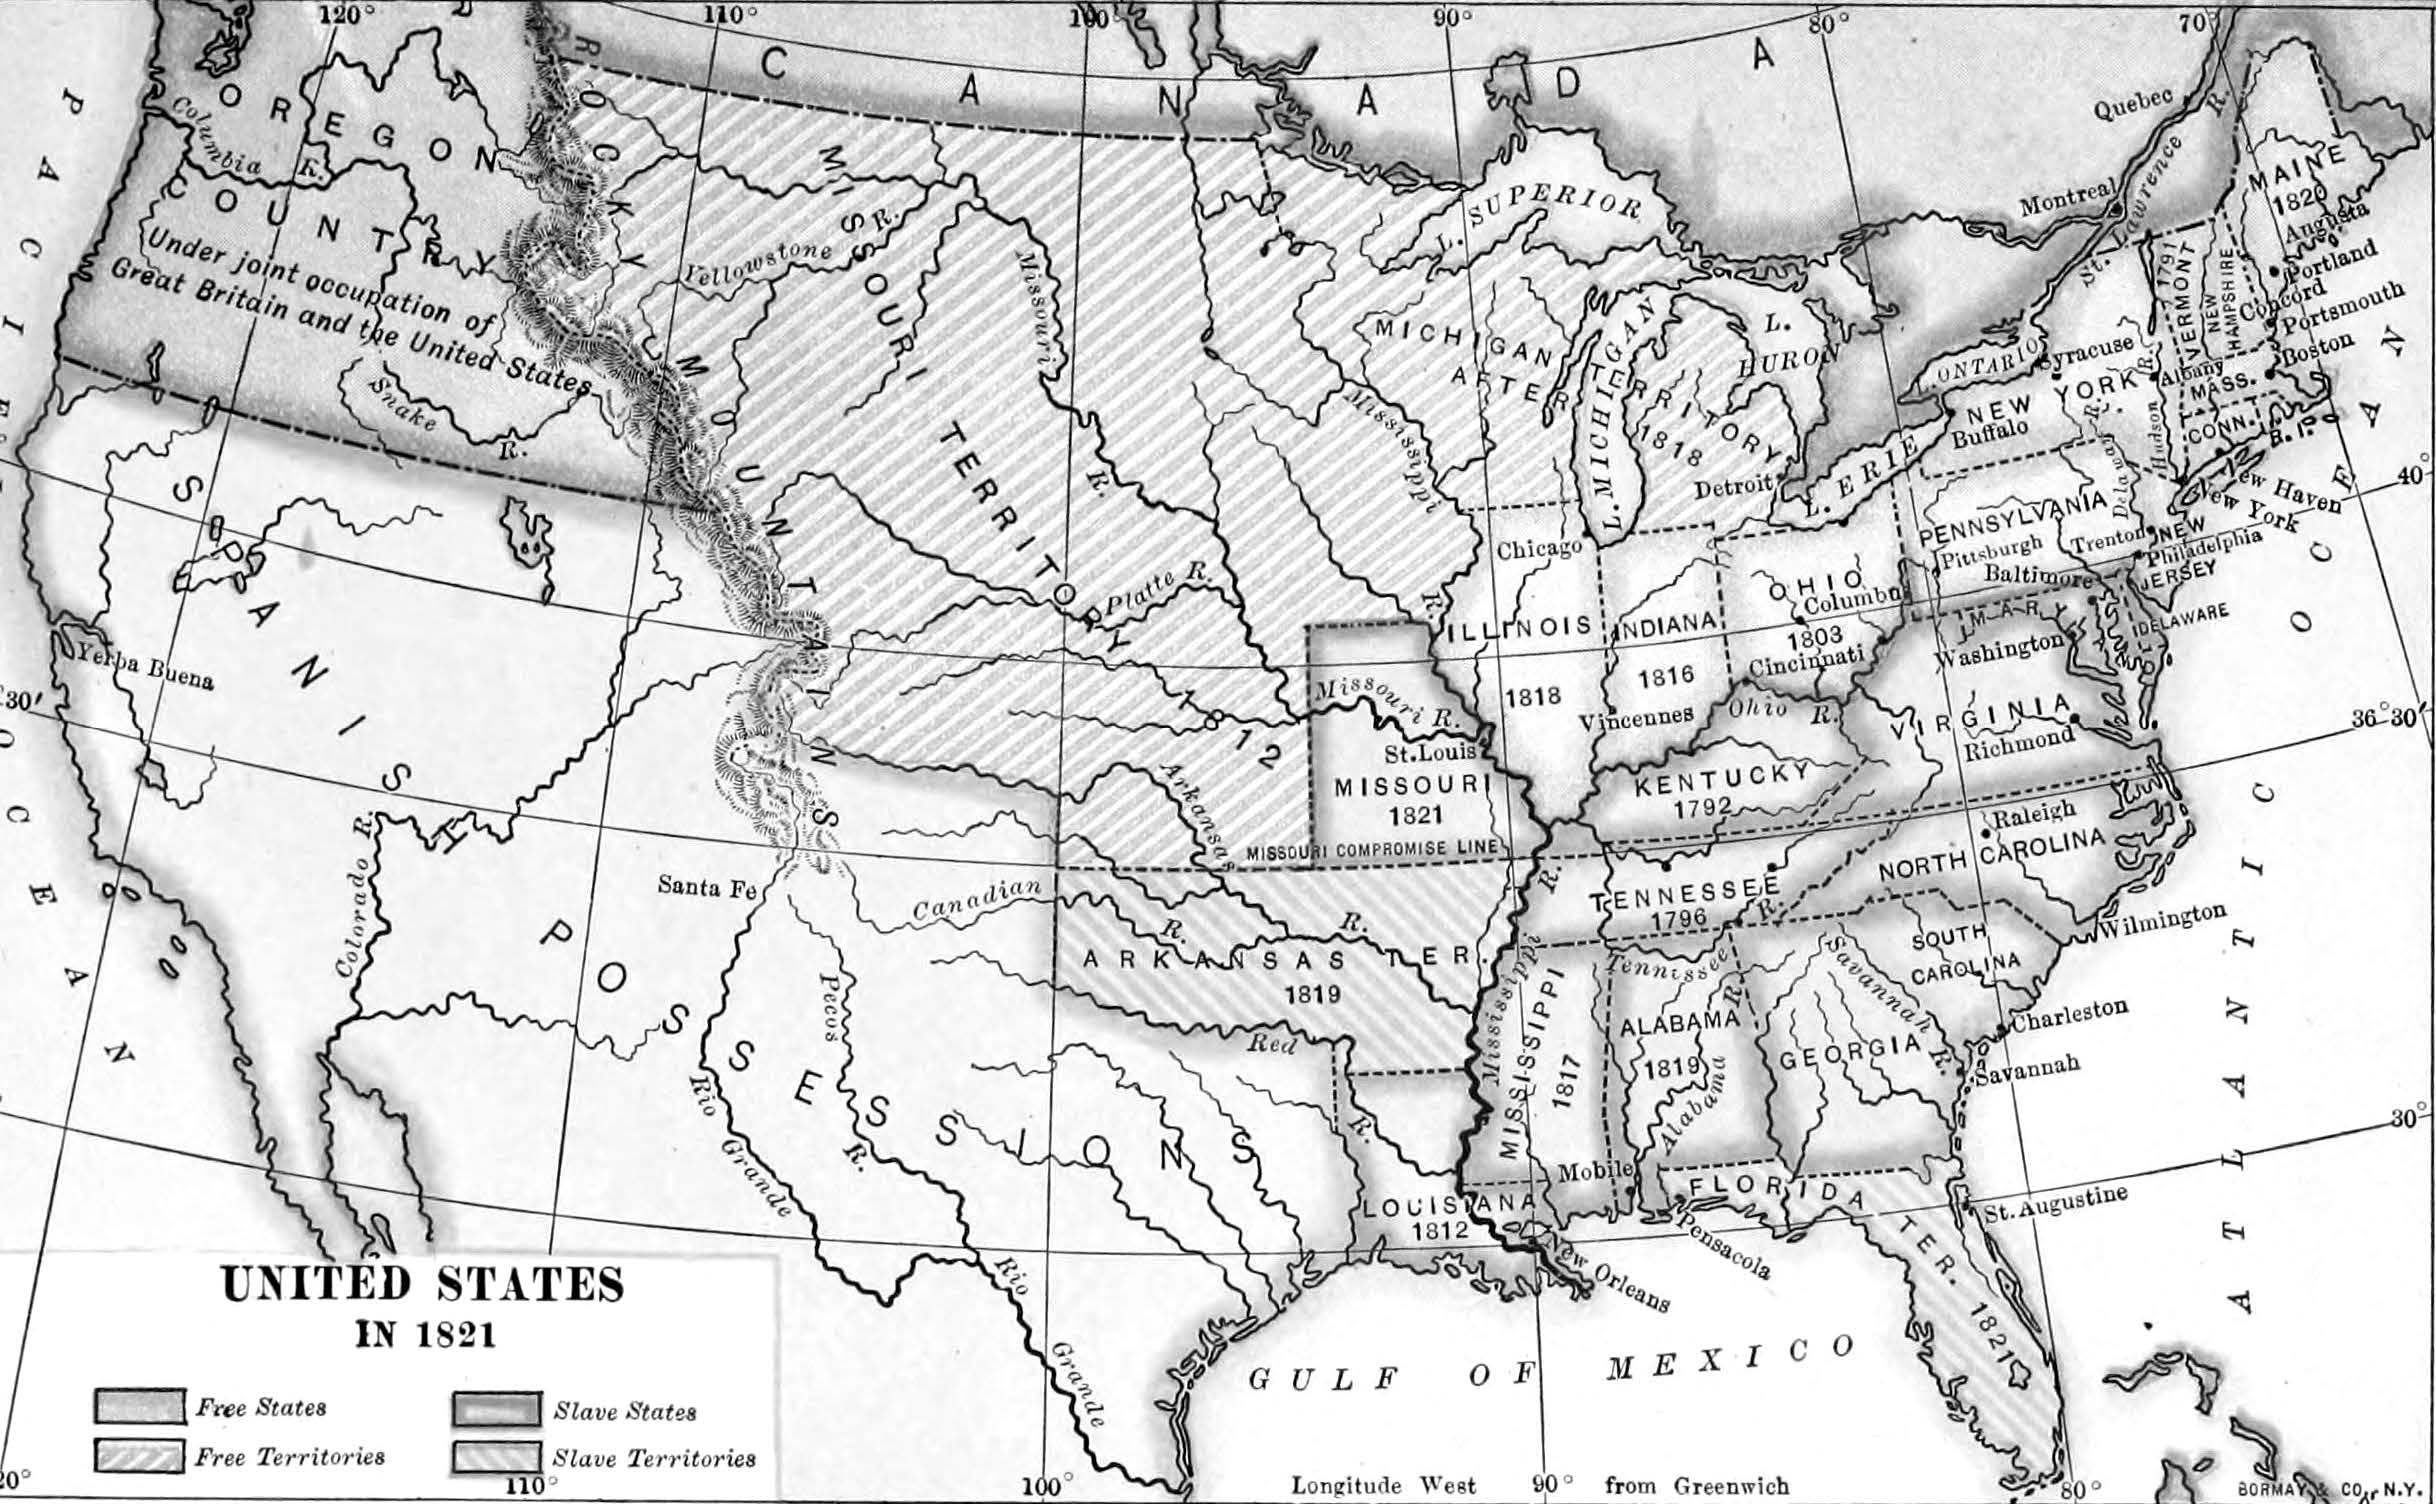 The United States in 1821. From Mowry and Mowry, Essentials of United States History.